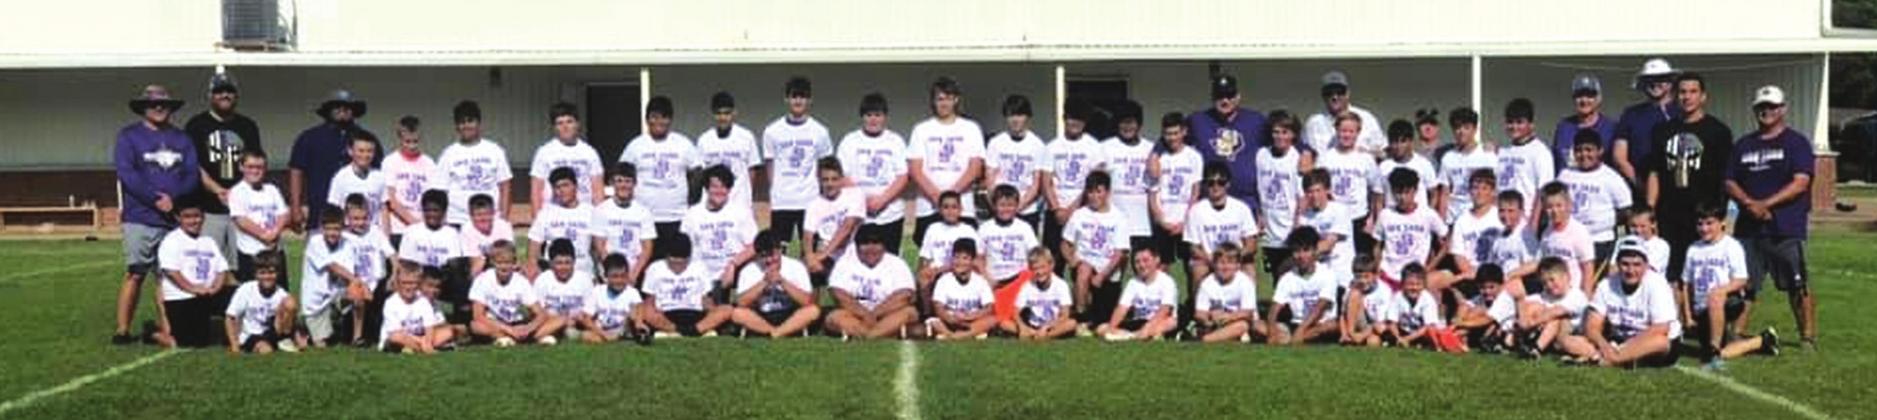 San Saba youth participate in football camp